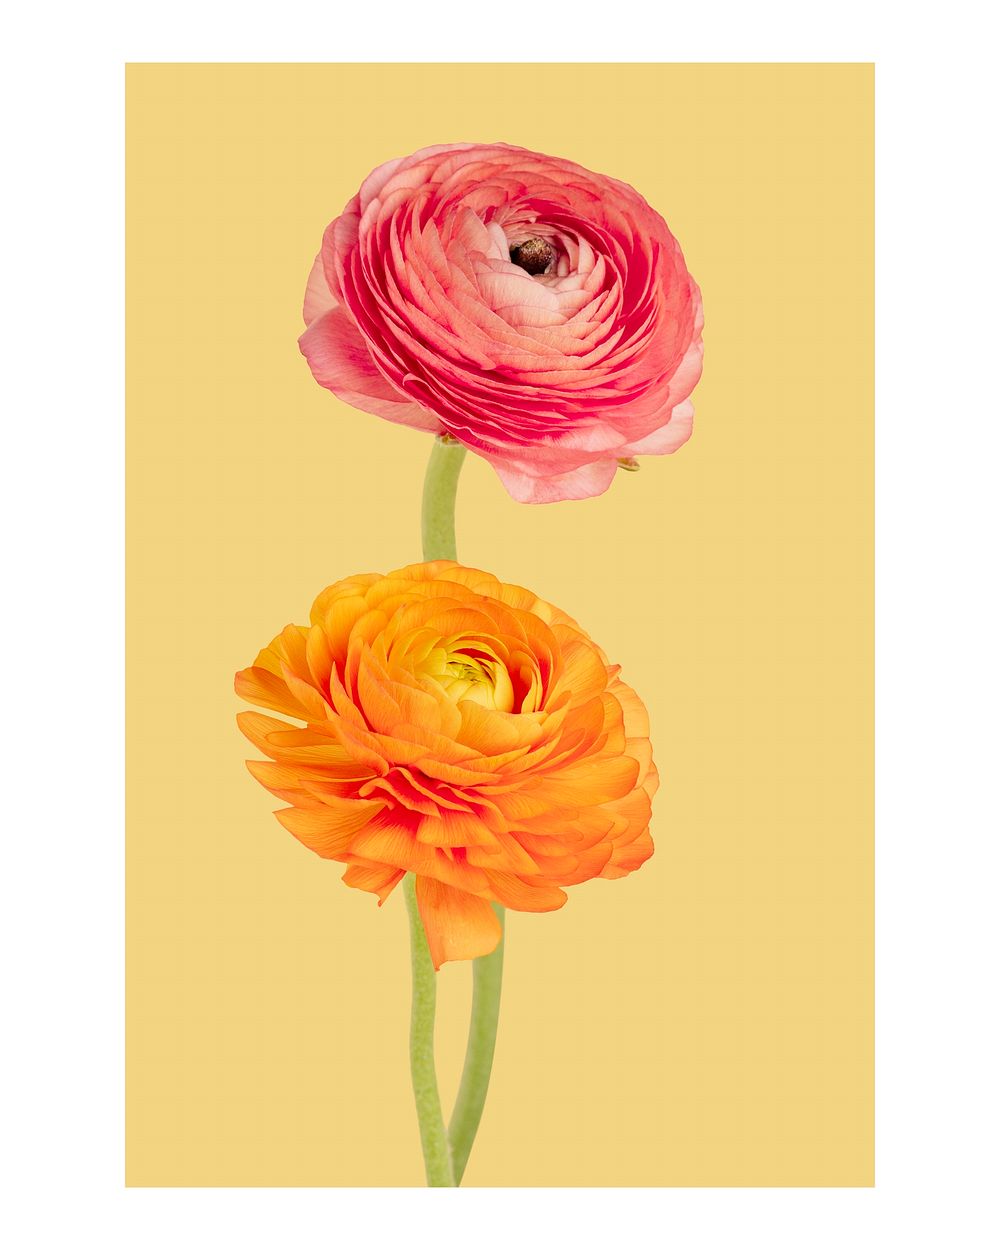 Aesthetic flower art print poster, pink and orange wall decor